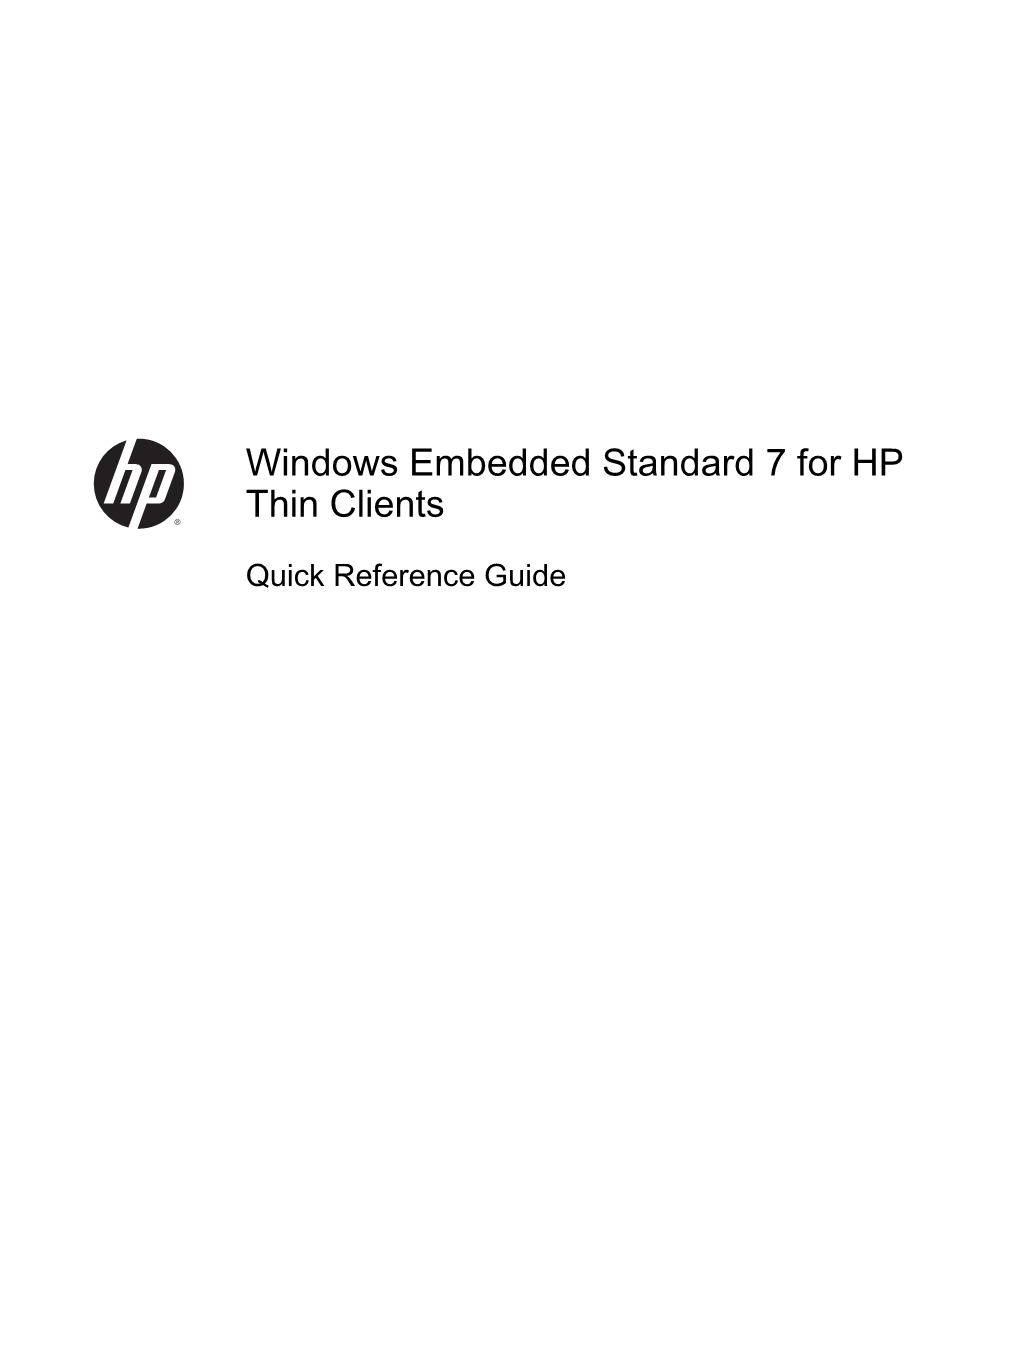 Quick Reference Guide © Copyright 2010, 2012–2013 Hewlett- Packard Development Company, L.P